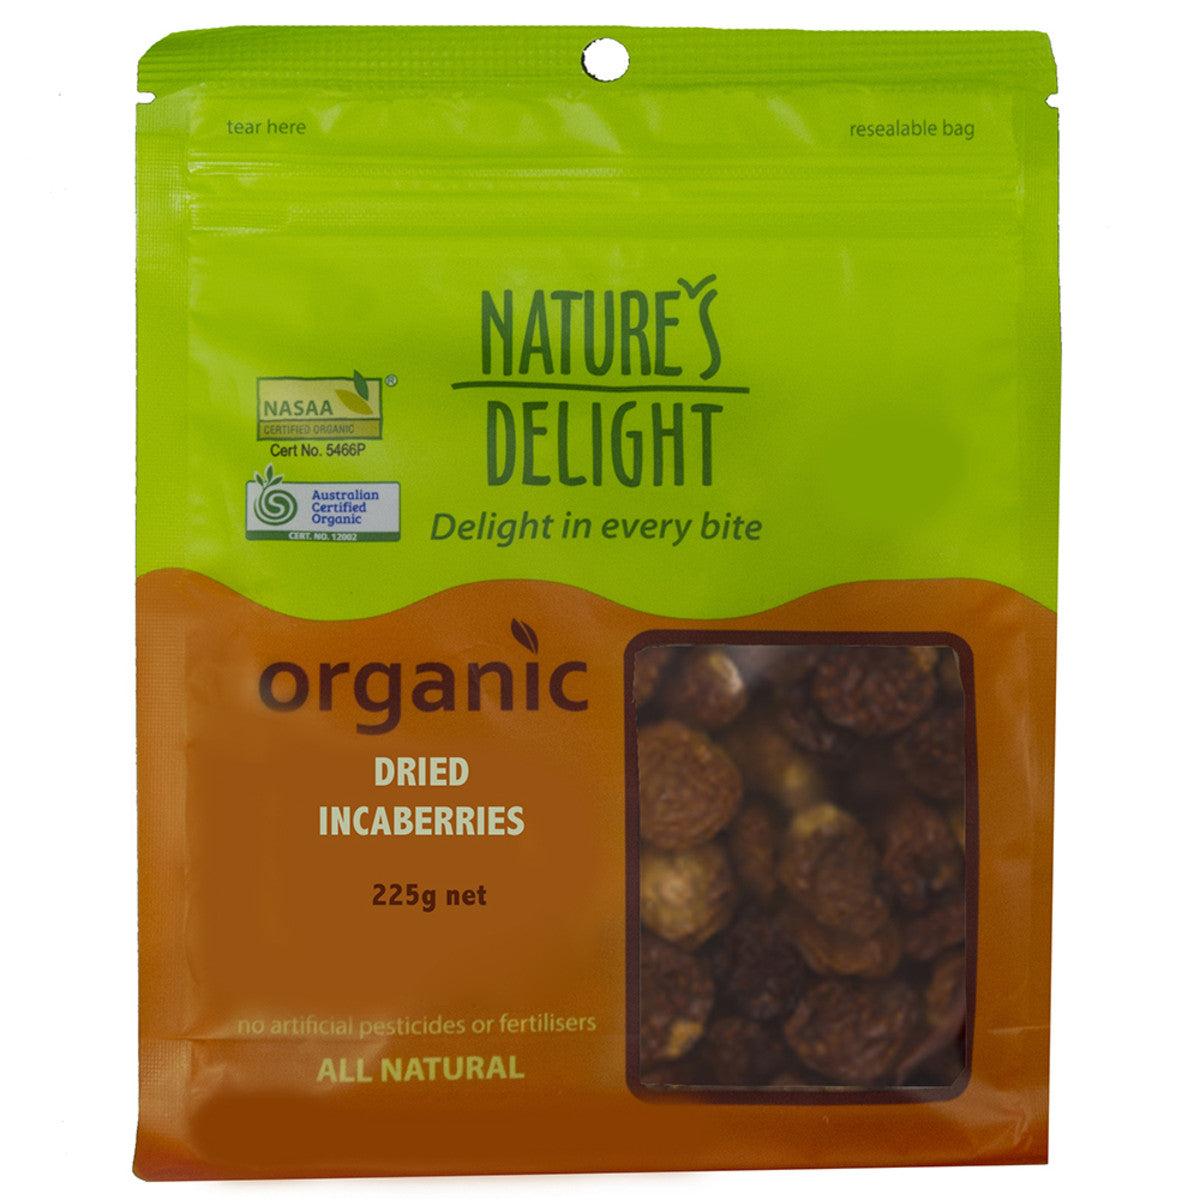 Natures Delight - Organic Dried Incaberries